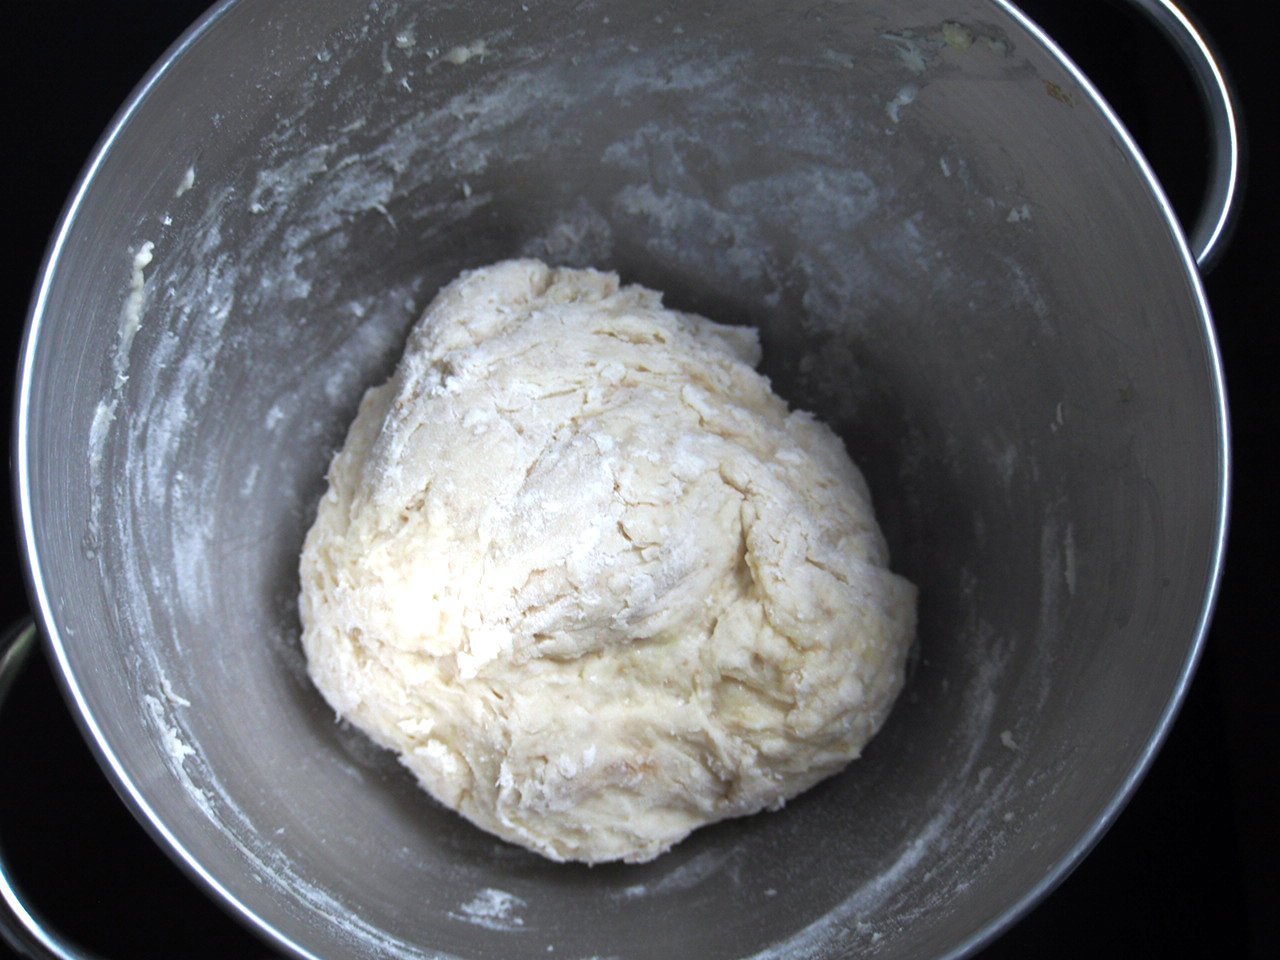 The dough gathers in the center of the bowl.